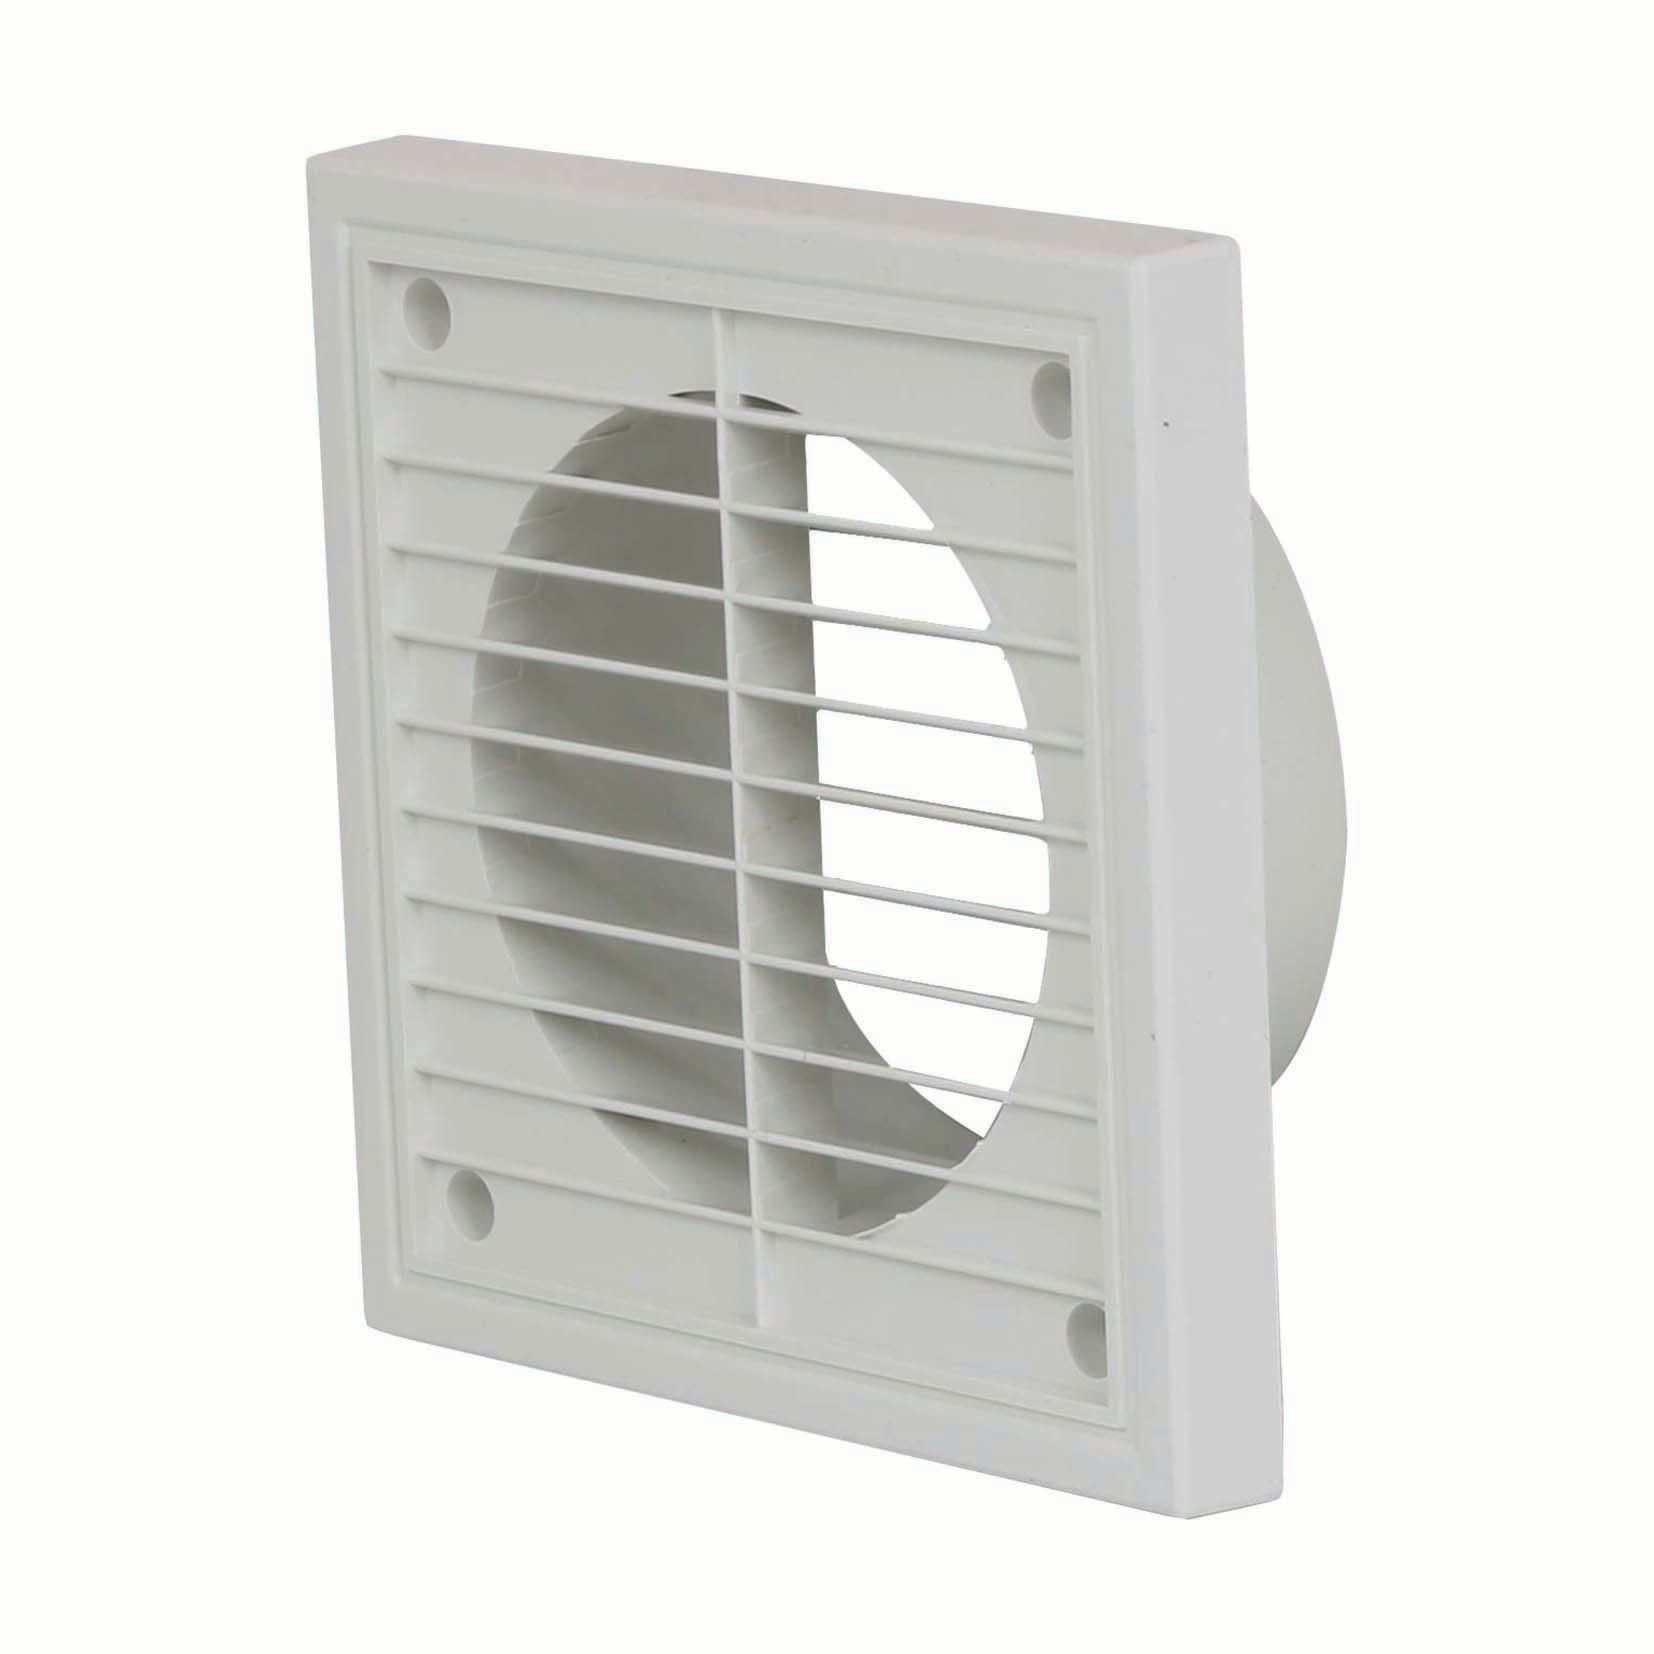 Image of Manrose PVC Fixed Grille - White 100mm